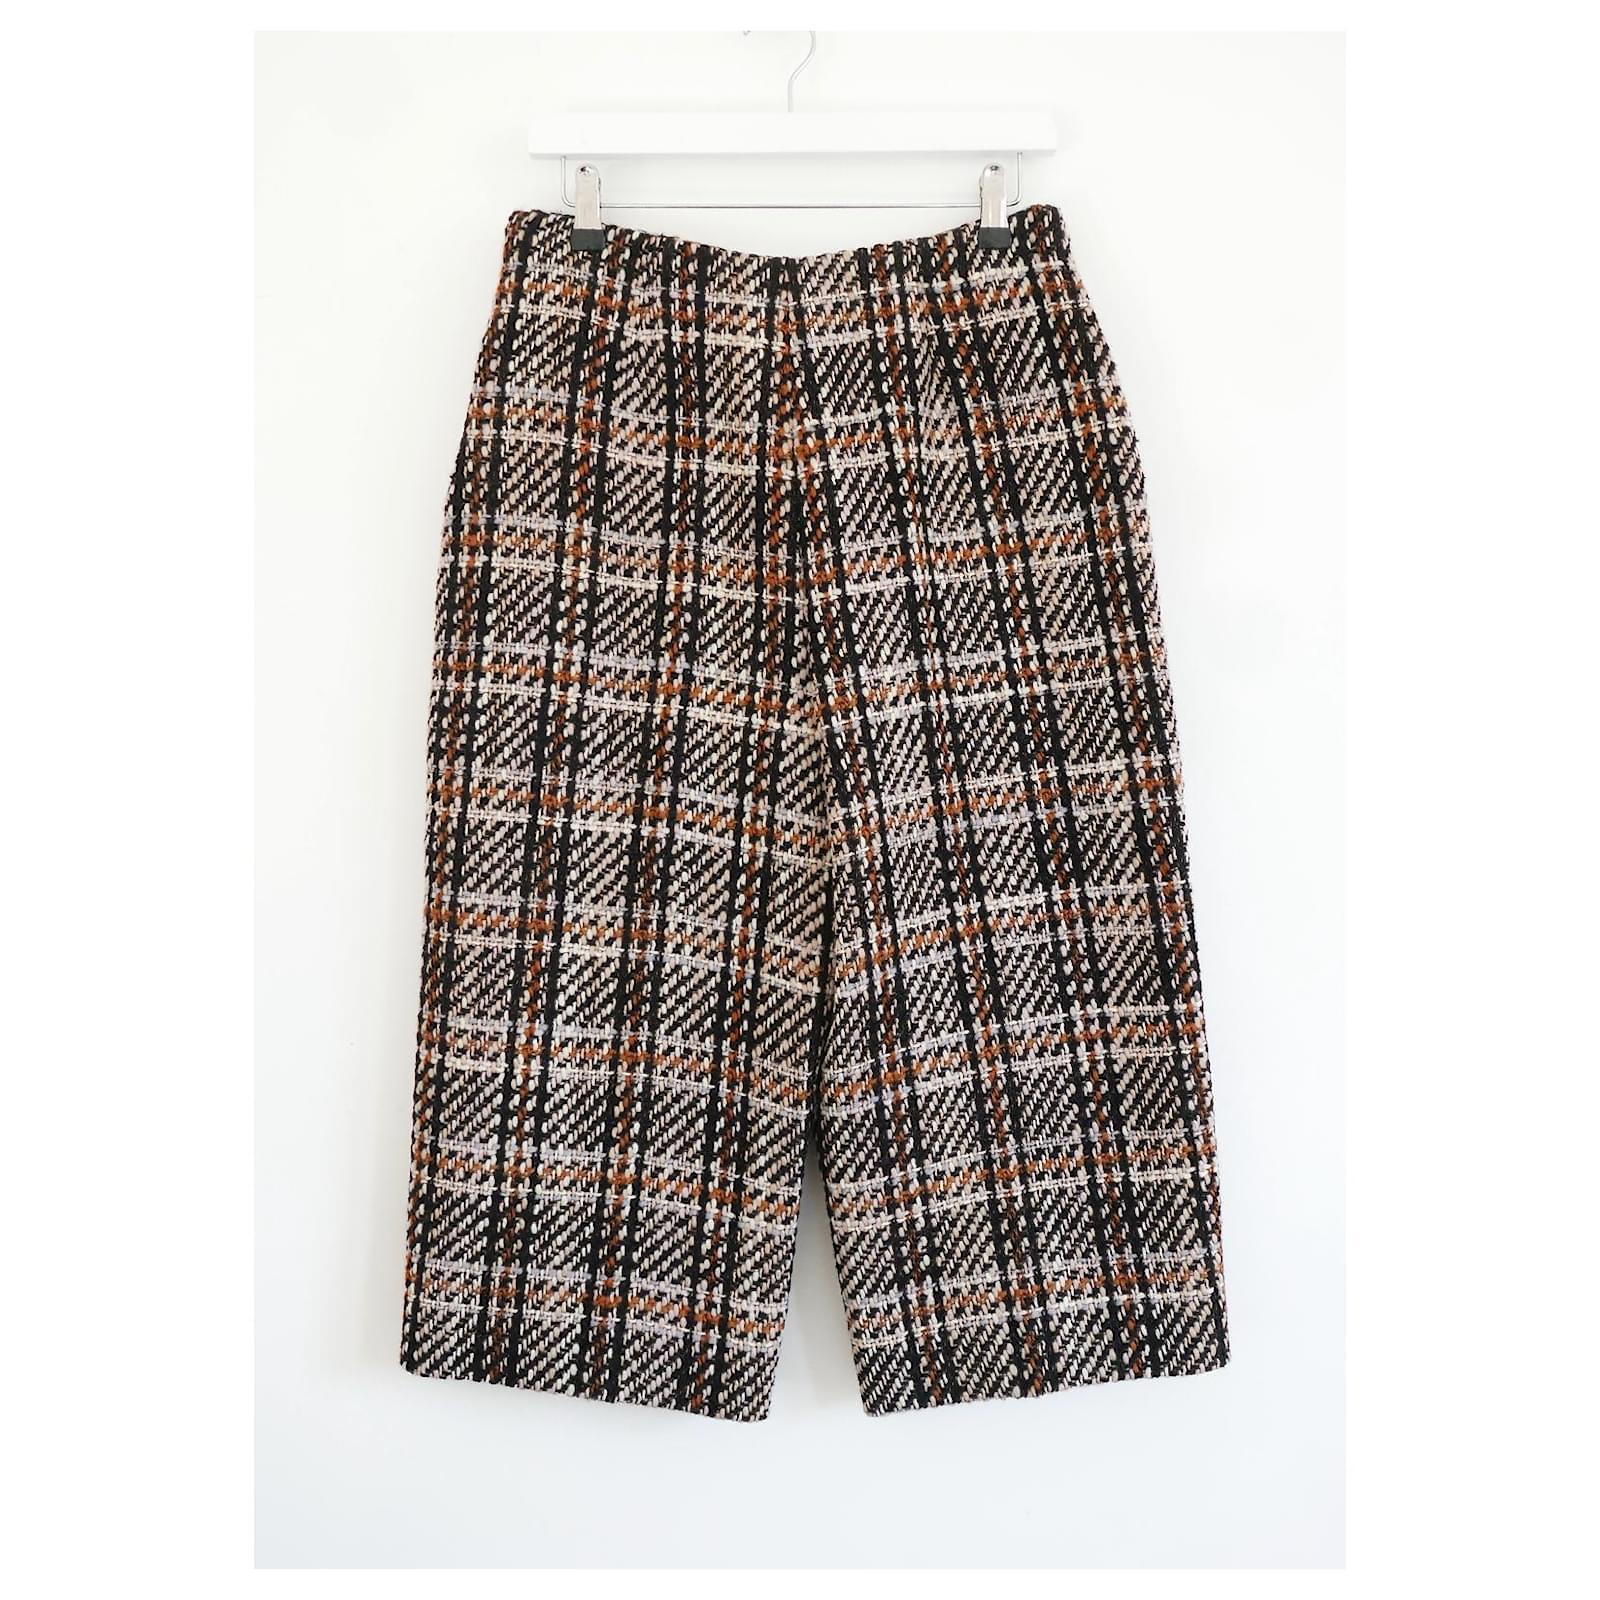 Cute and chic Valentino tweed culottes from the Pre-Fall 2014 collection. Look 41. Unworn. Made from thick jumbo tweed in shades of brown, beige and black. They have wide legs with slanted hip pockets, high waist and side zip. Lined in soft black